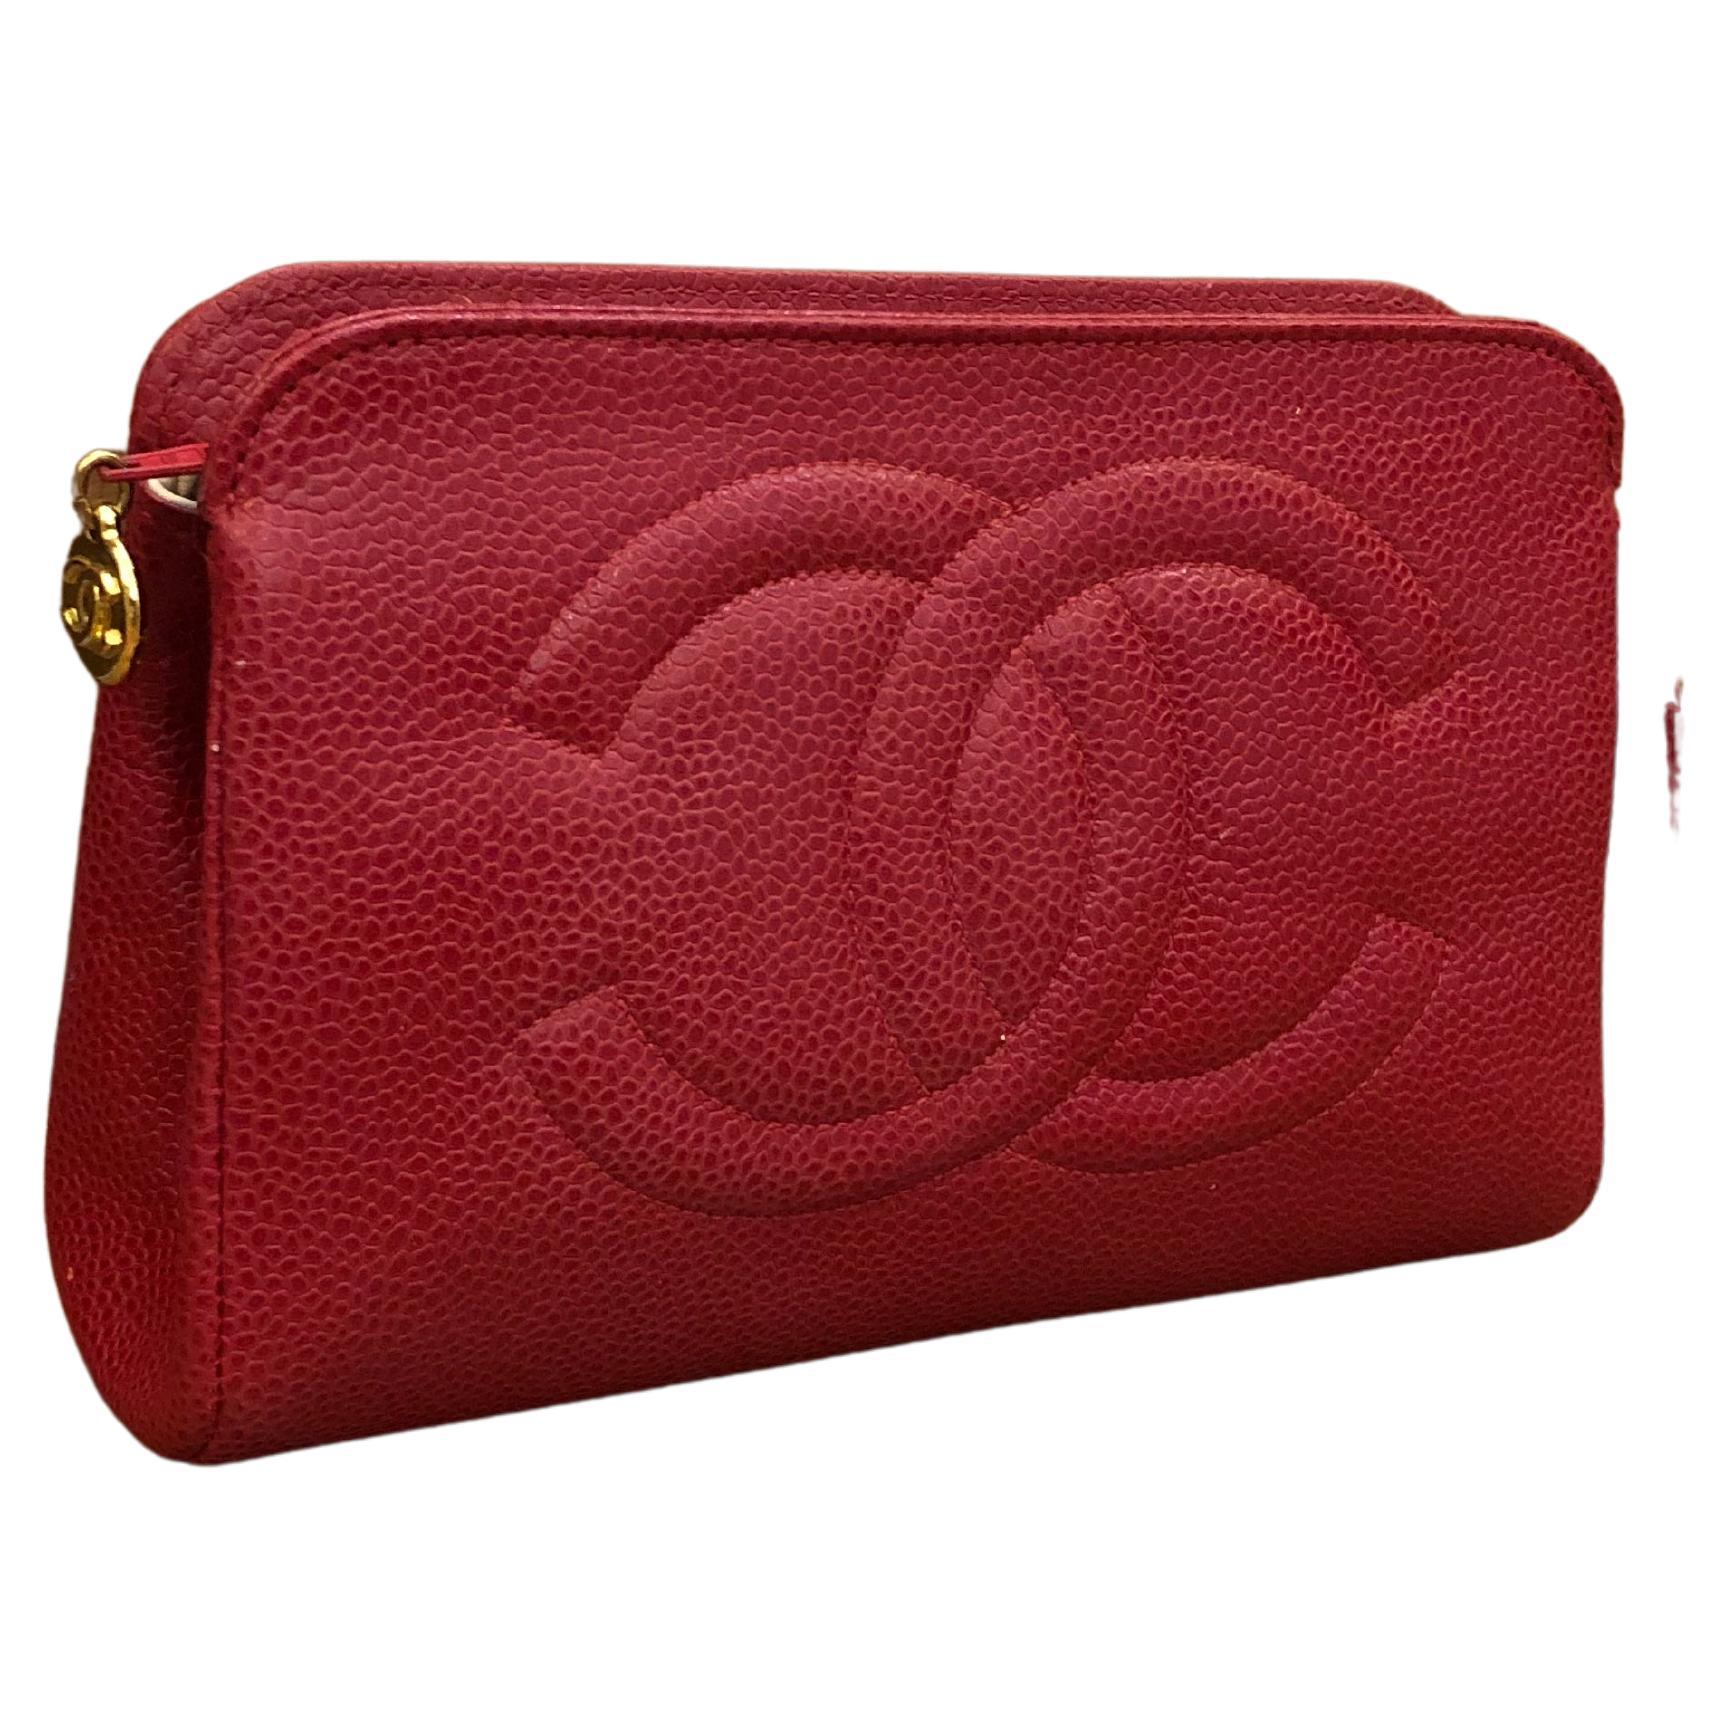 RESERVED Vintage CHANEL Red Caviar Leather Pouch Bag Clutch (Altered)